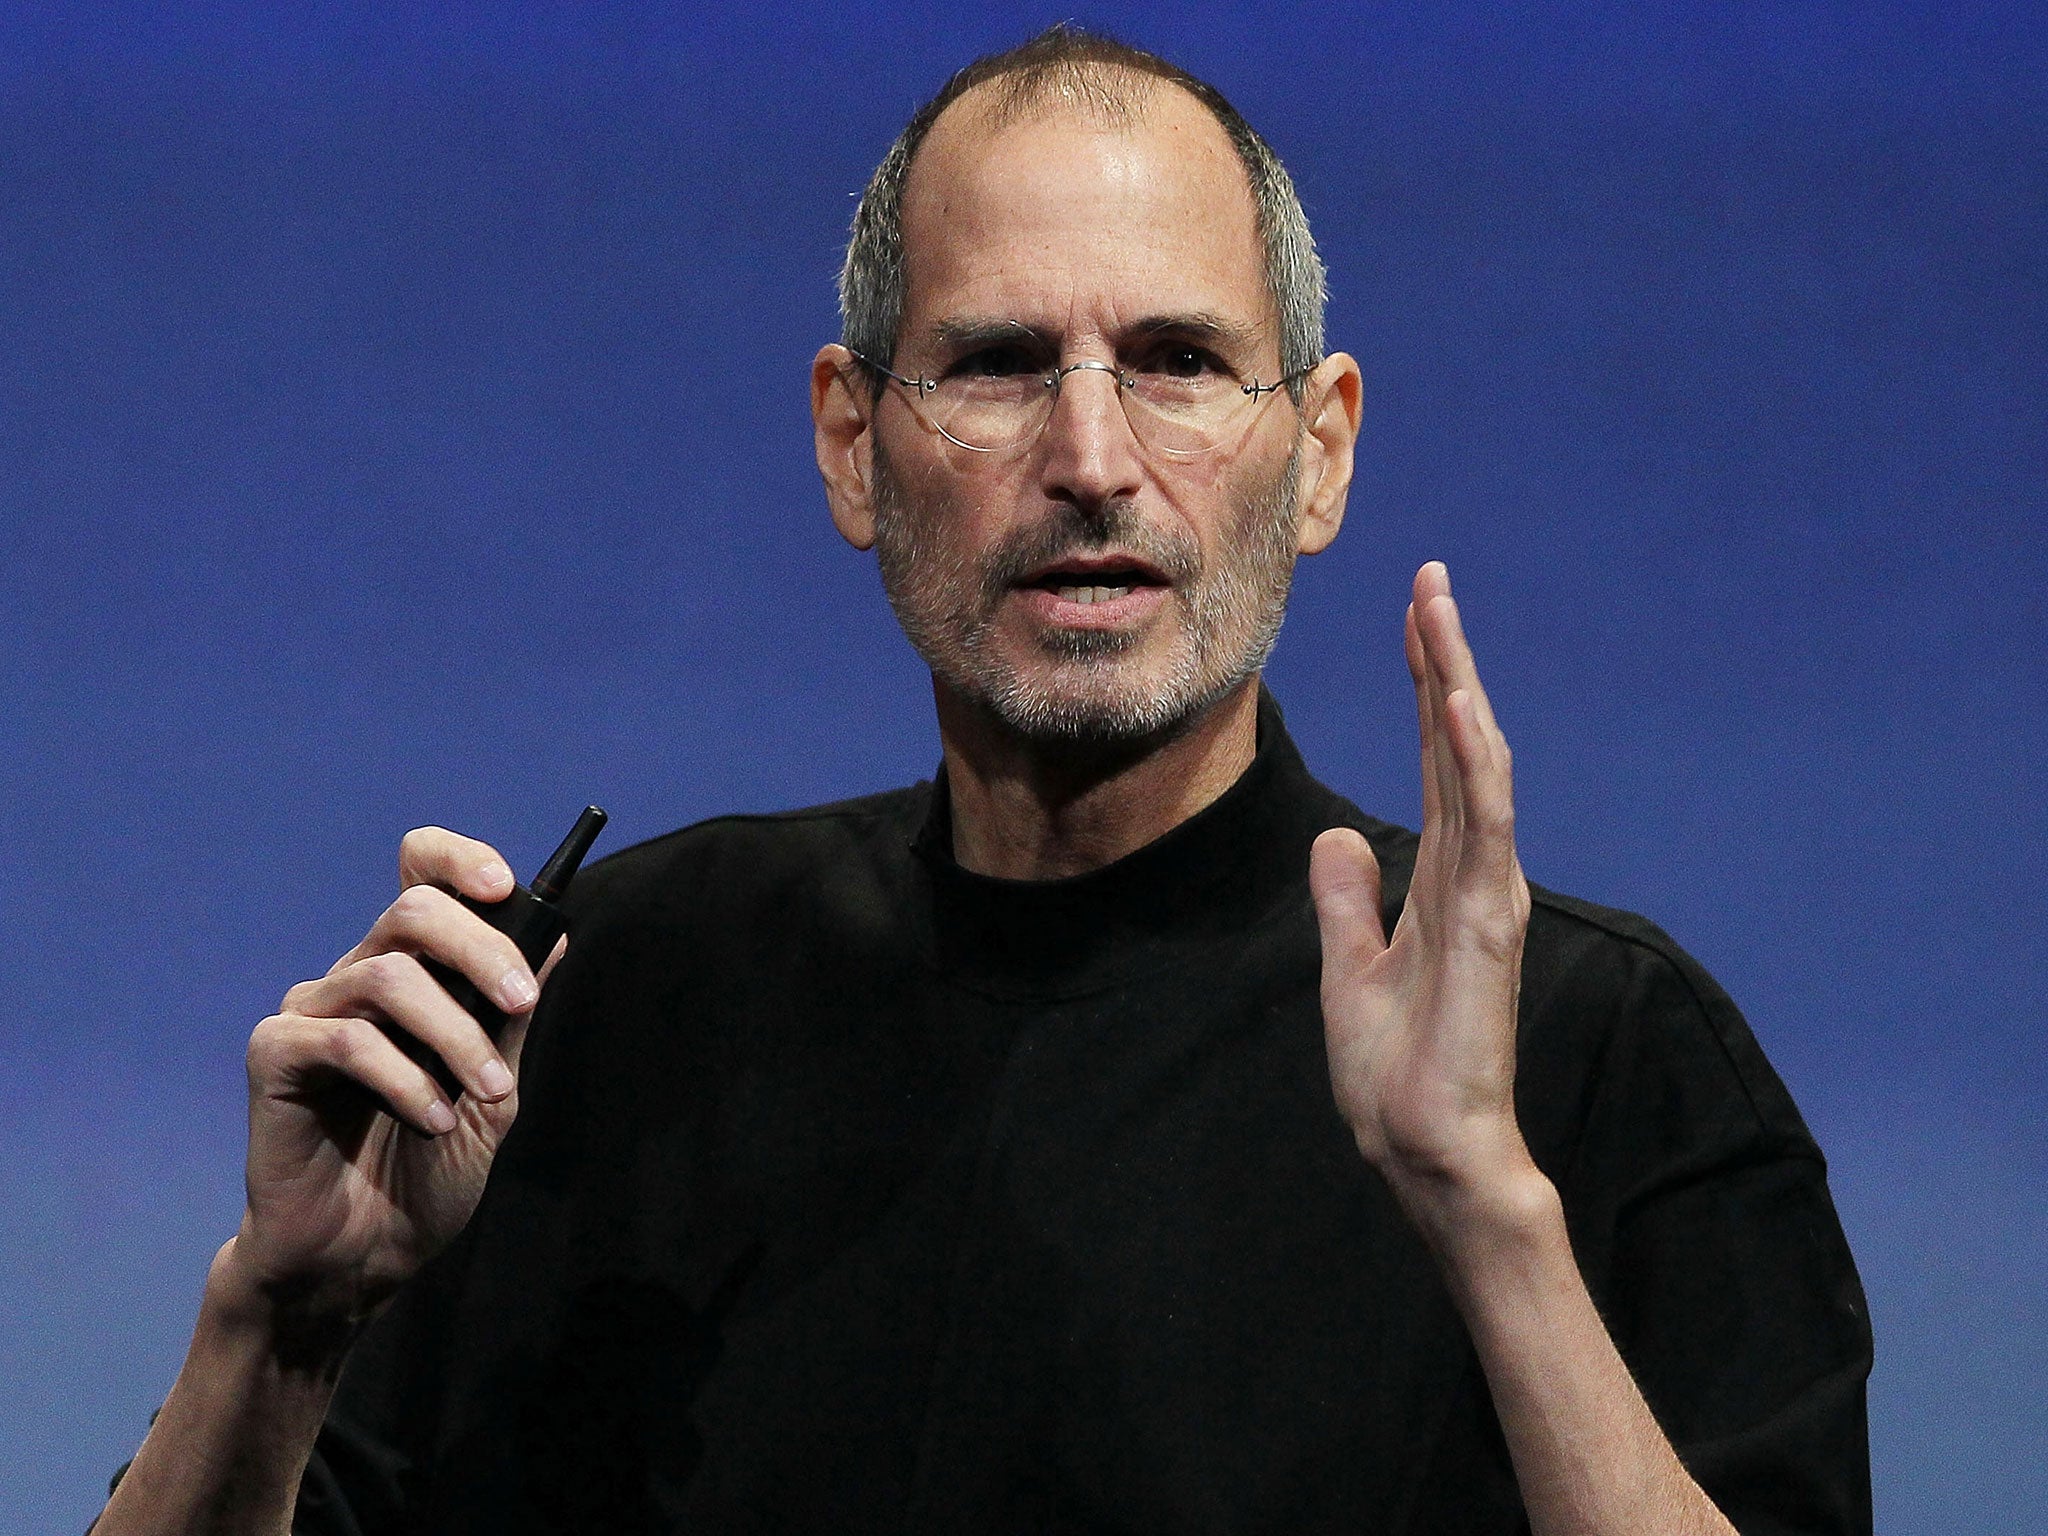 Late Apple CEO Steve Jobs pictured speaking during an Apple event in April 2010